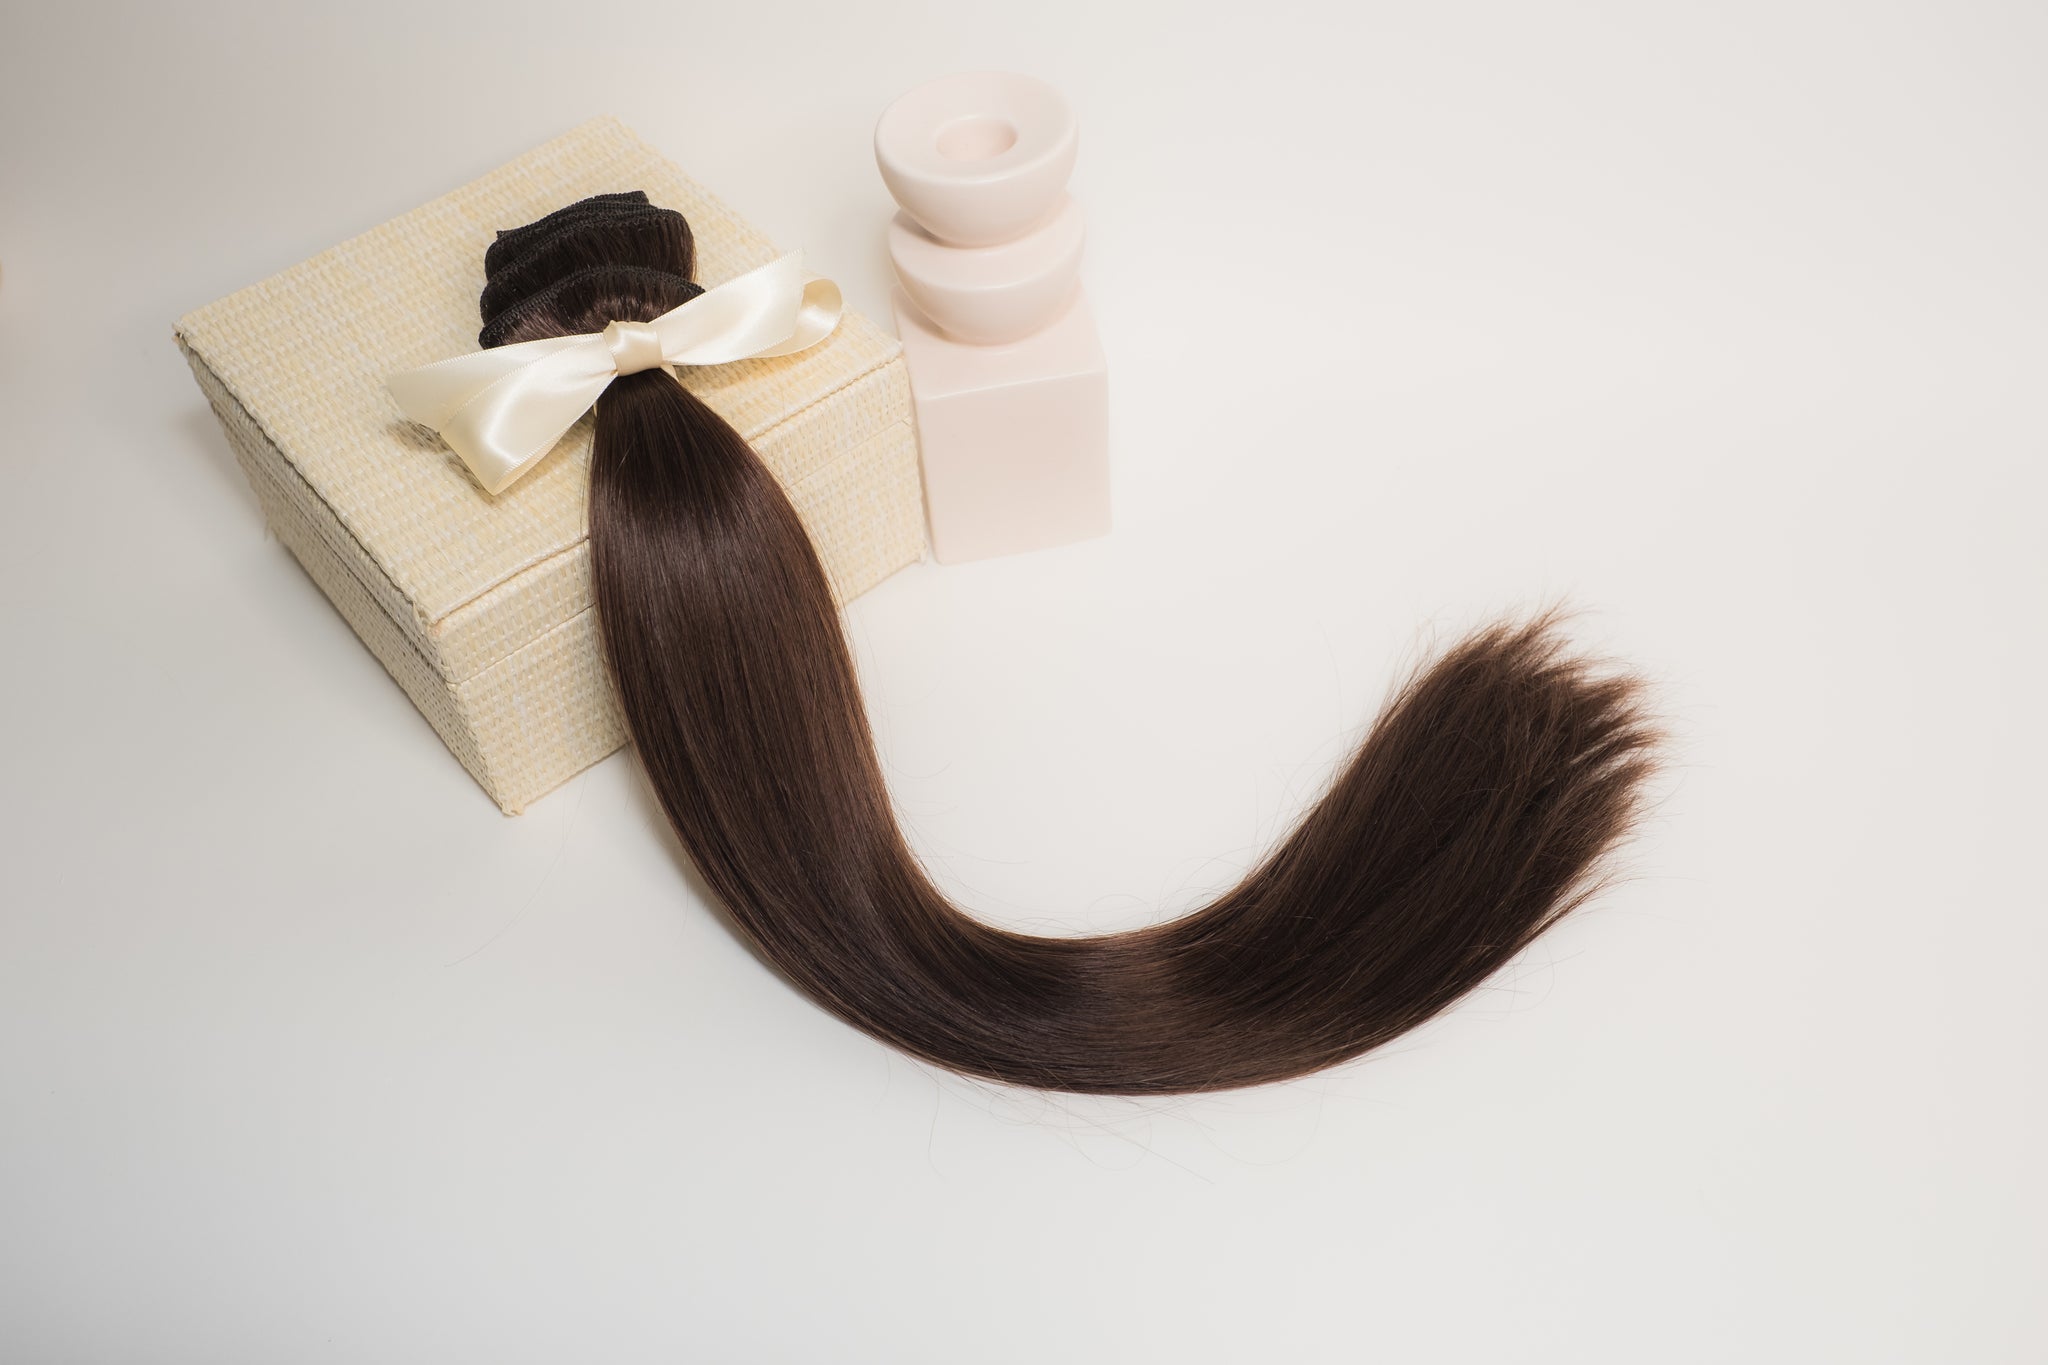 22" Clip In Hair Extensions Deluxe Box ($398.00 - $438.00)